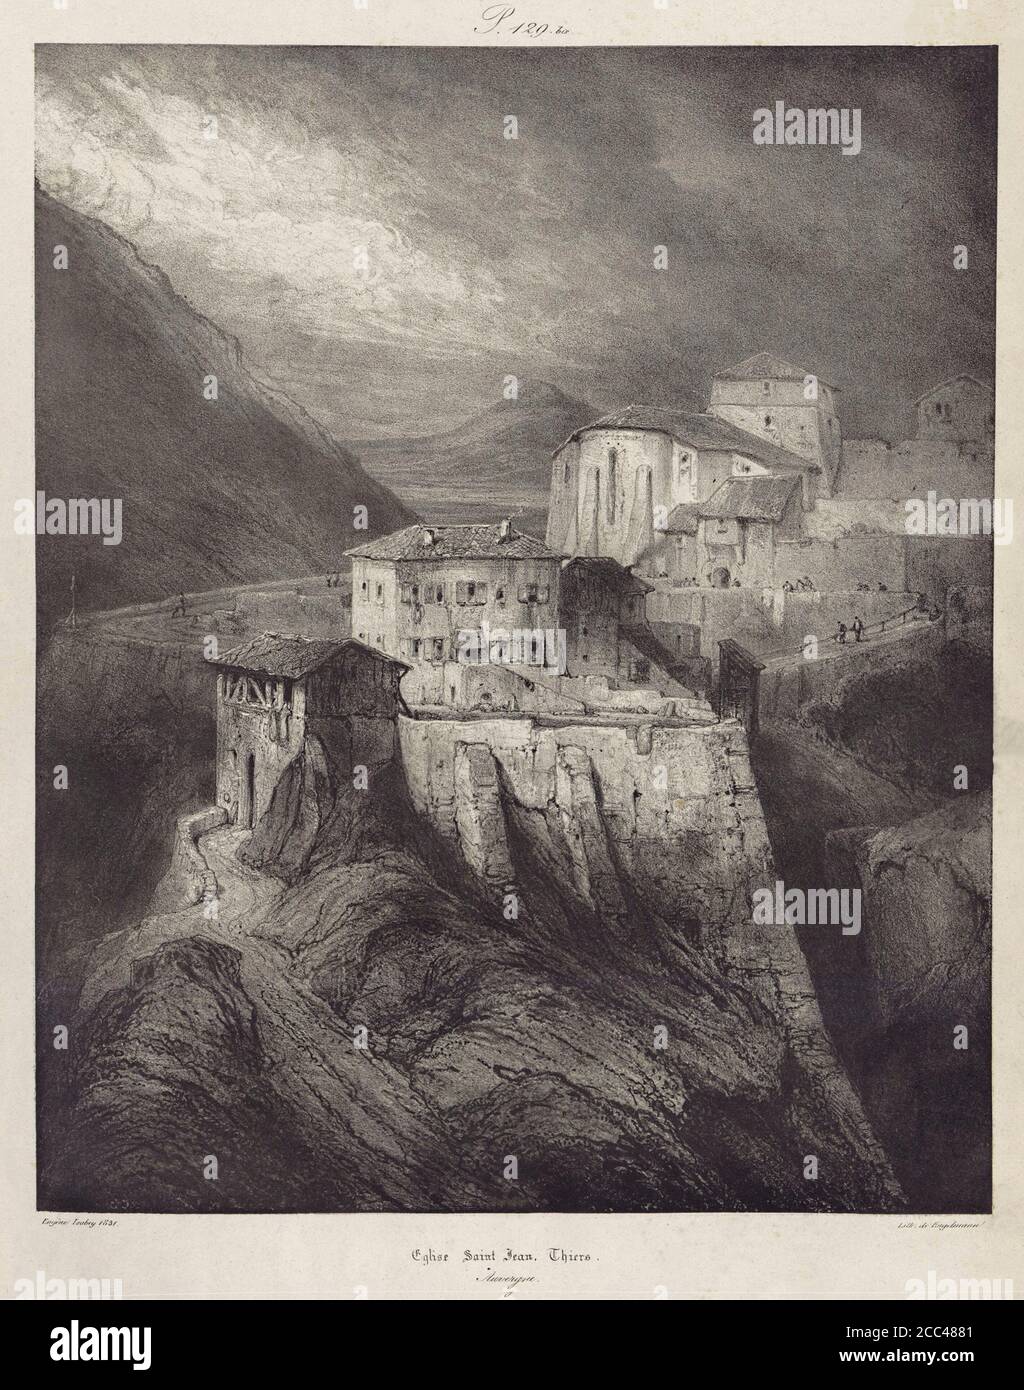 Engraving of the St. John's church. Thiers. France. 19th century Thiers  is a commune in the Puy-de-Dôme department of Auvergne in central France.  Vo Stock Photo